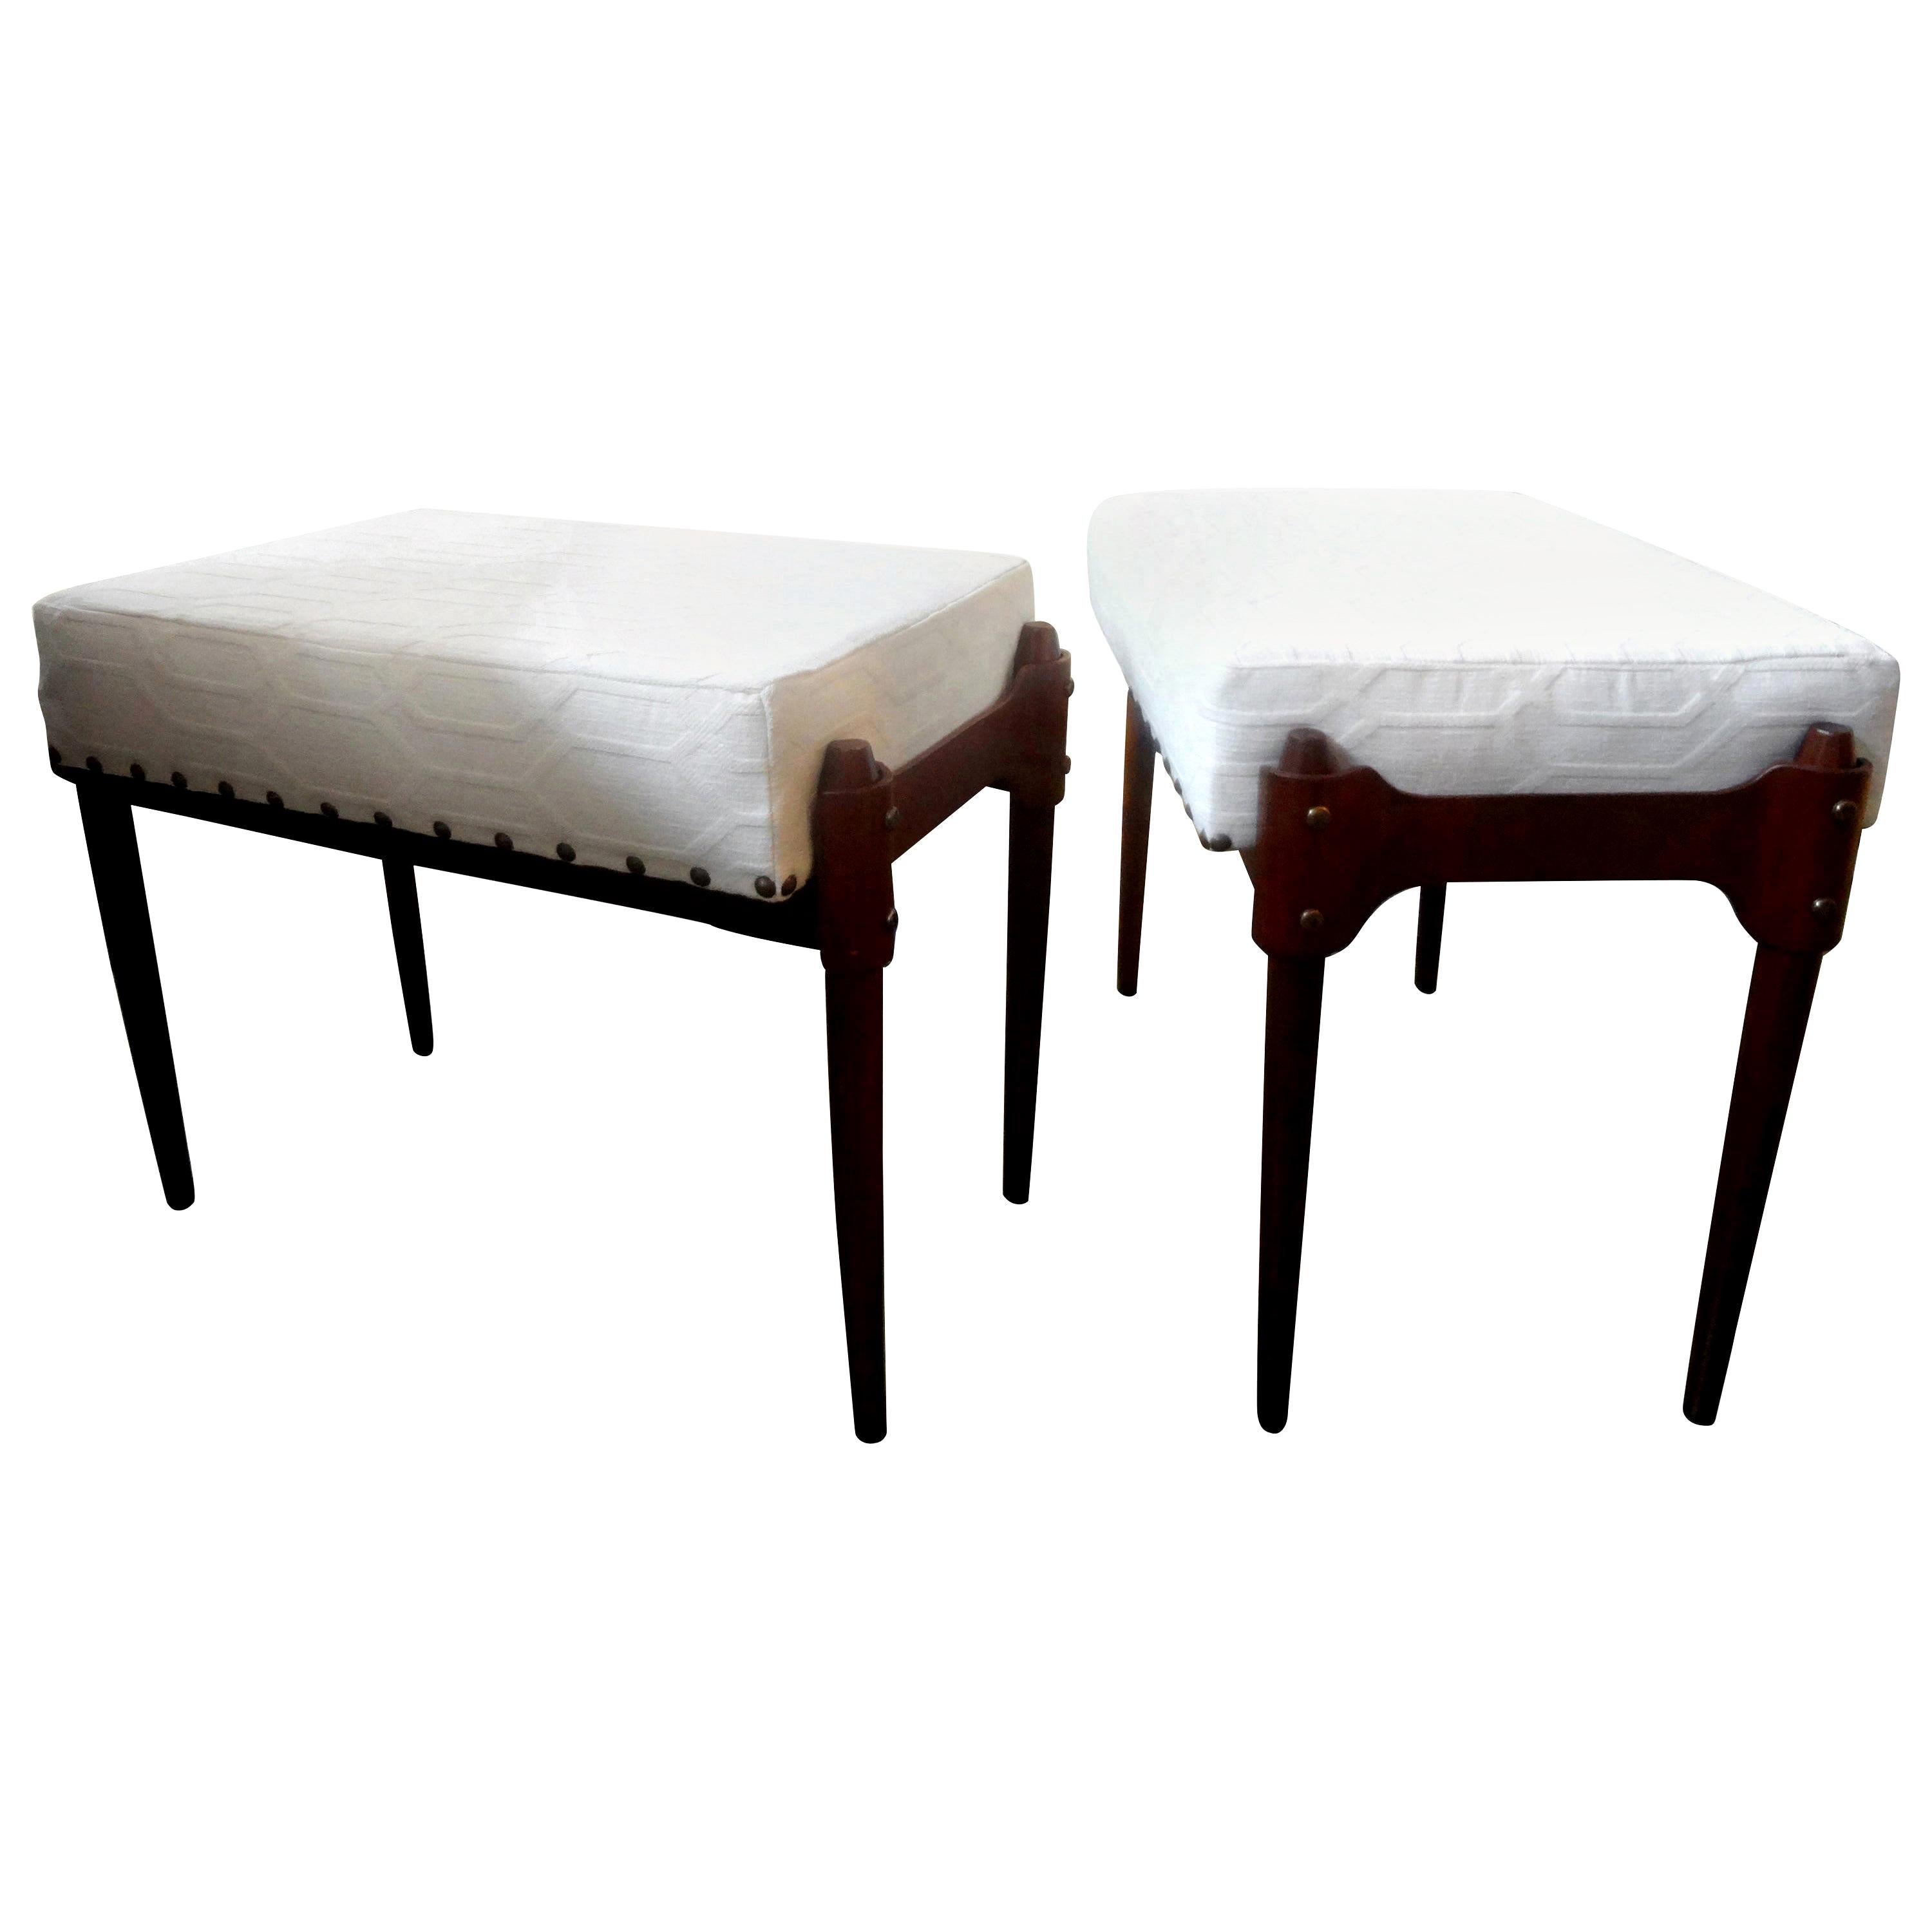 Pair of Italian Gio Ponti Inspired Midcentury Benches or Ottomans